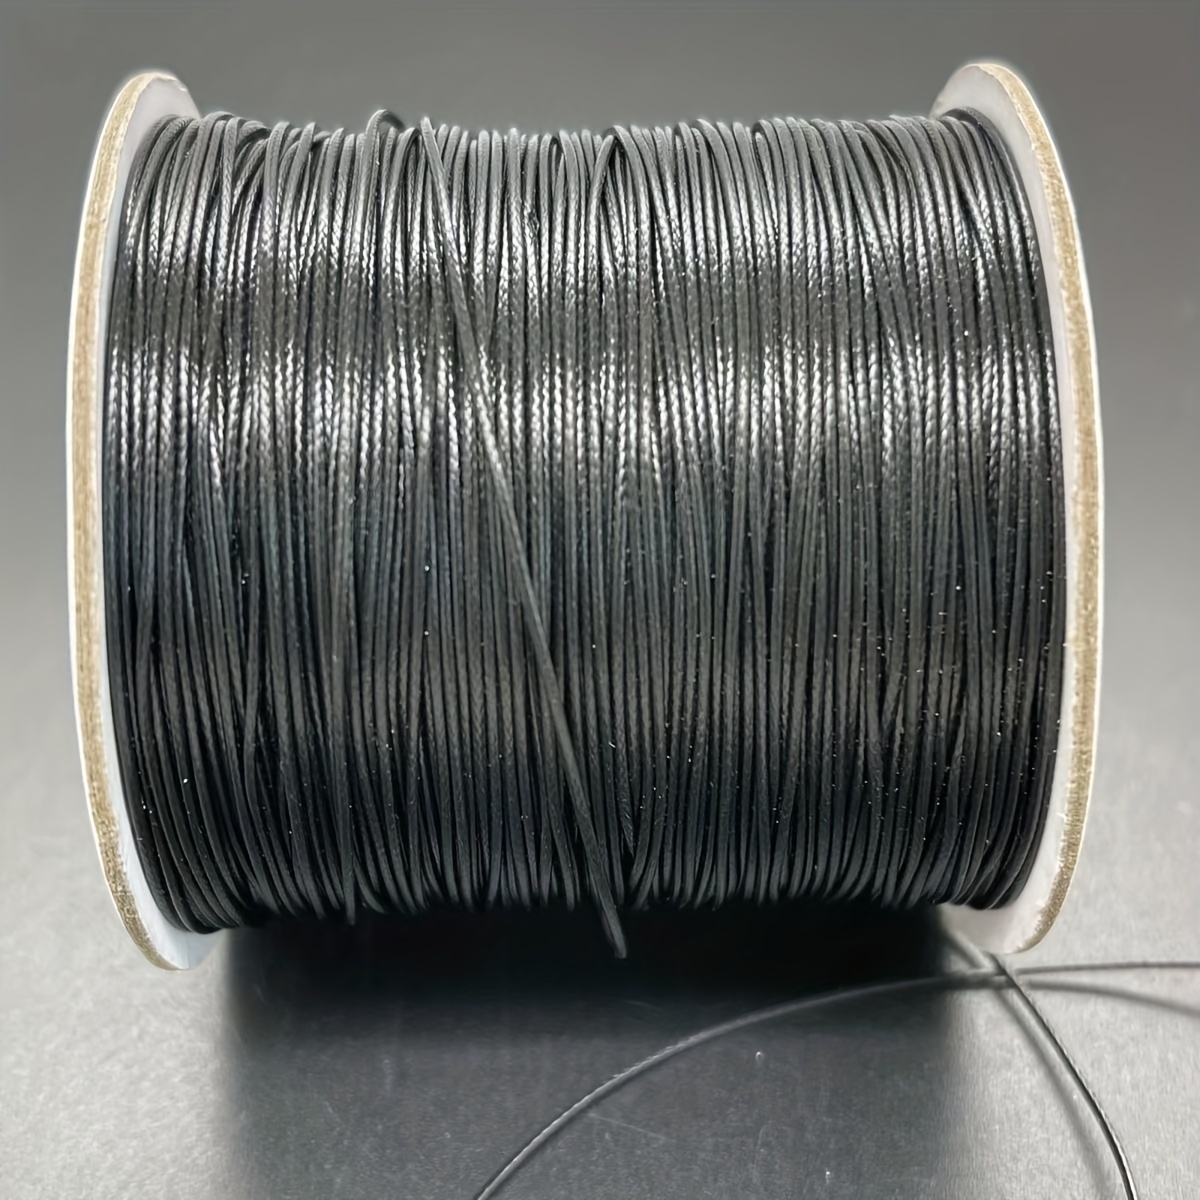 1 mm Waxed Cord for Jewelry Making Necklace String Wax Cord for Jewelry String Bracelet Cord 109 Yards/328 Feet Waxed Cotton Cord for Jewelry Making